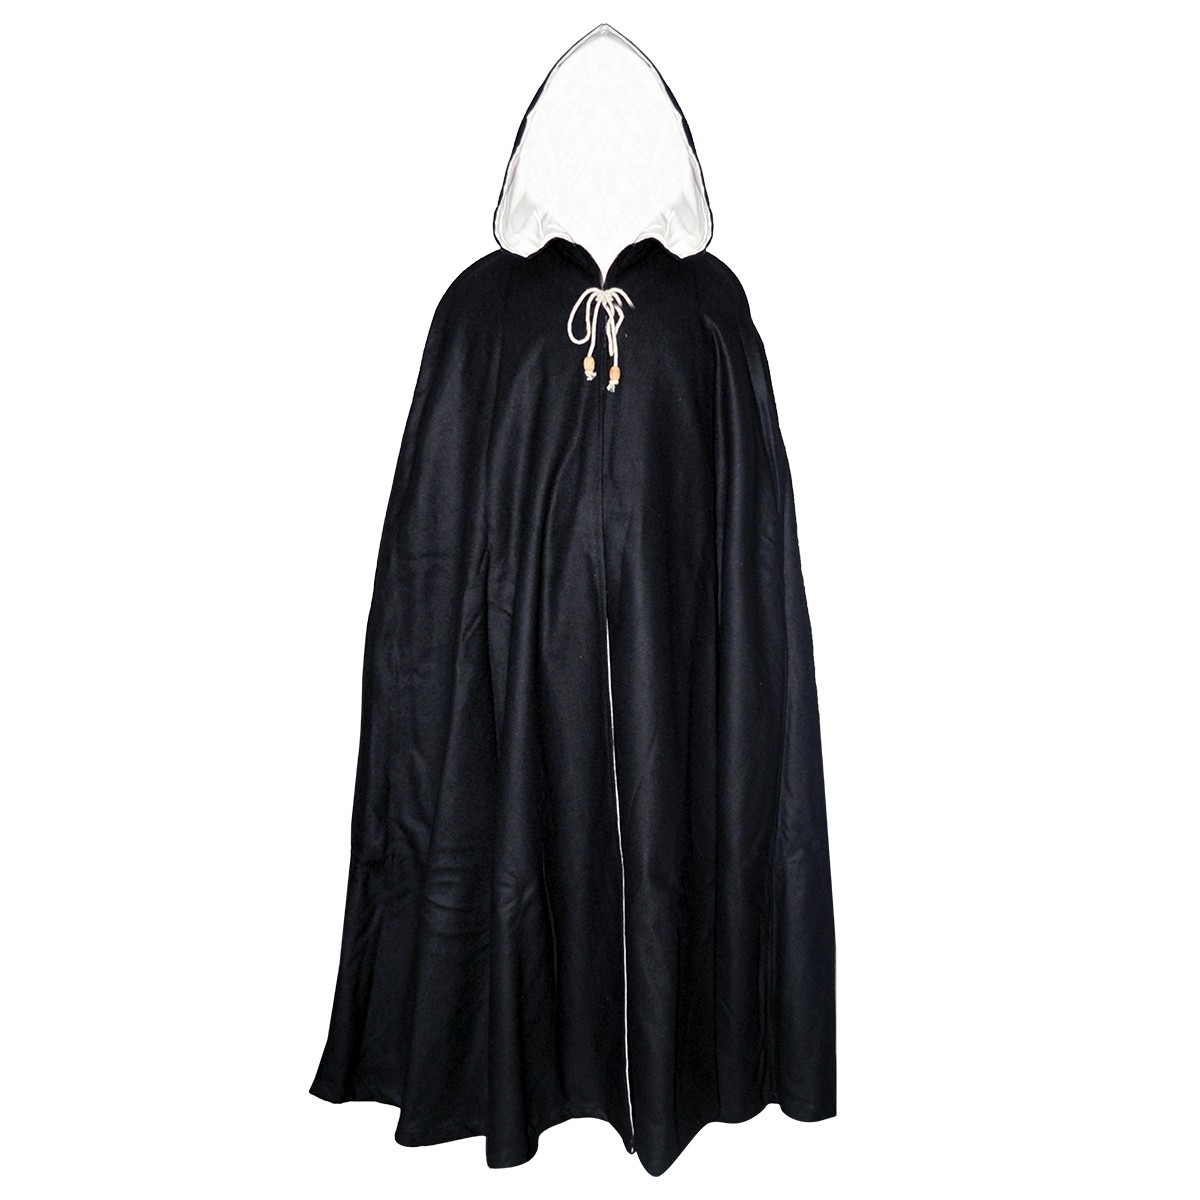 Black Medieval Hooded Cloak - Authentic Woolen and 100% Linen Lining Cape